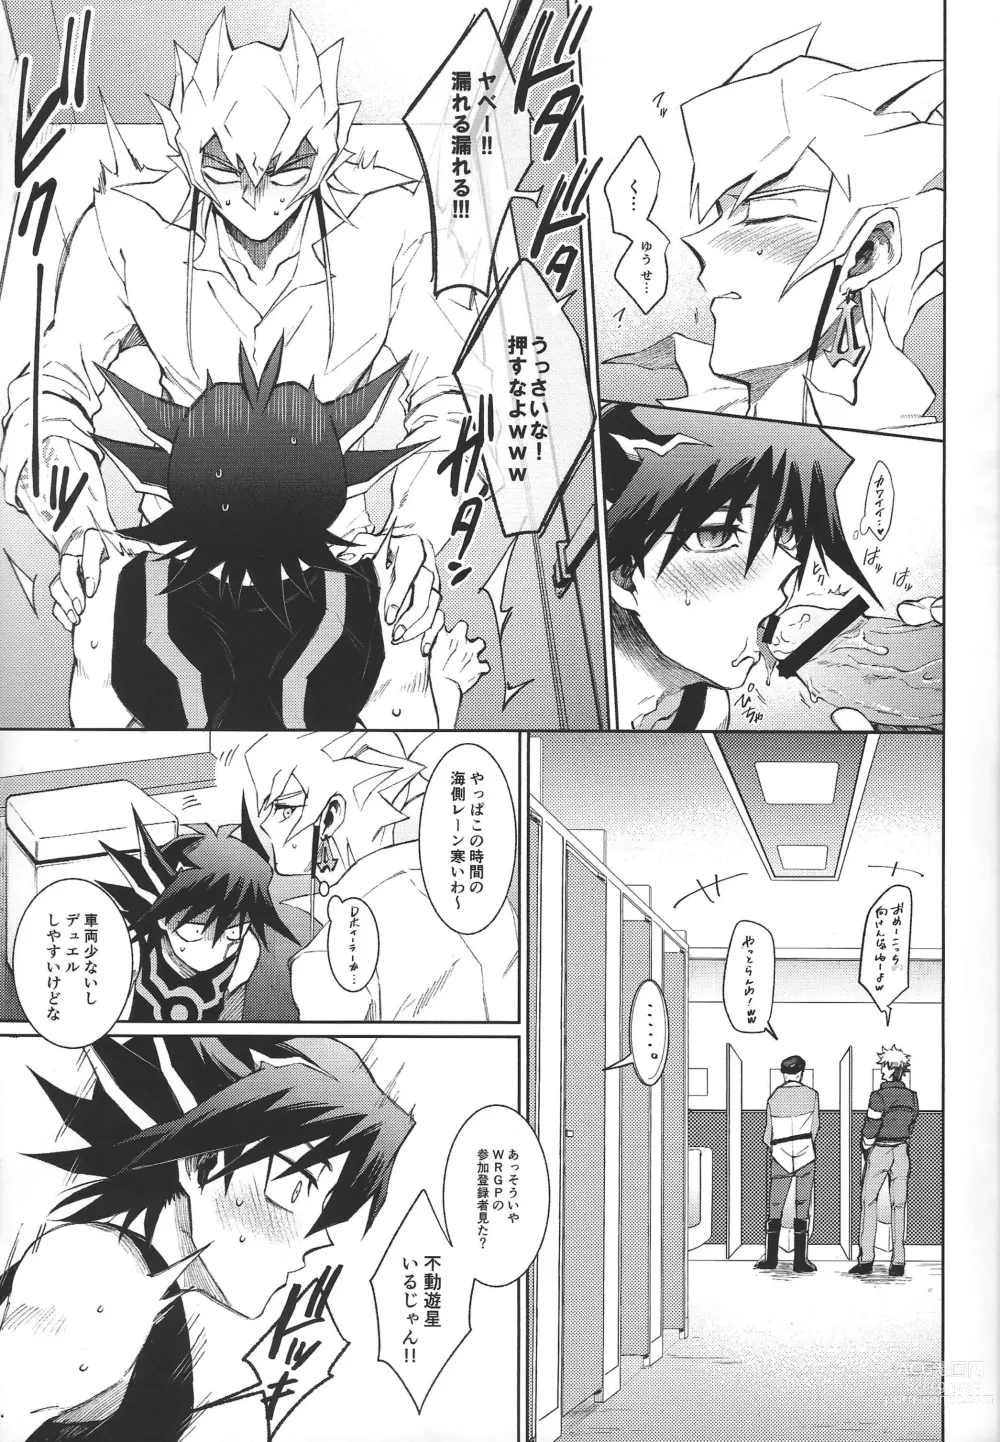 Page 14 of doujinshi night mischief